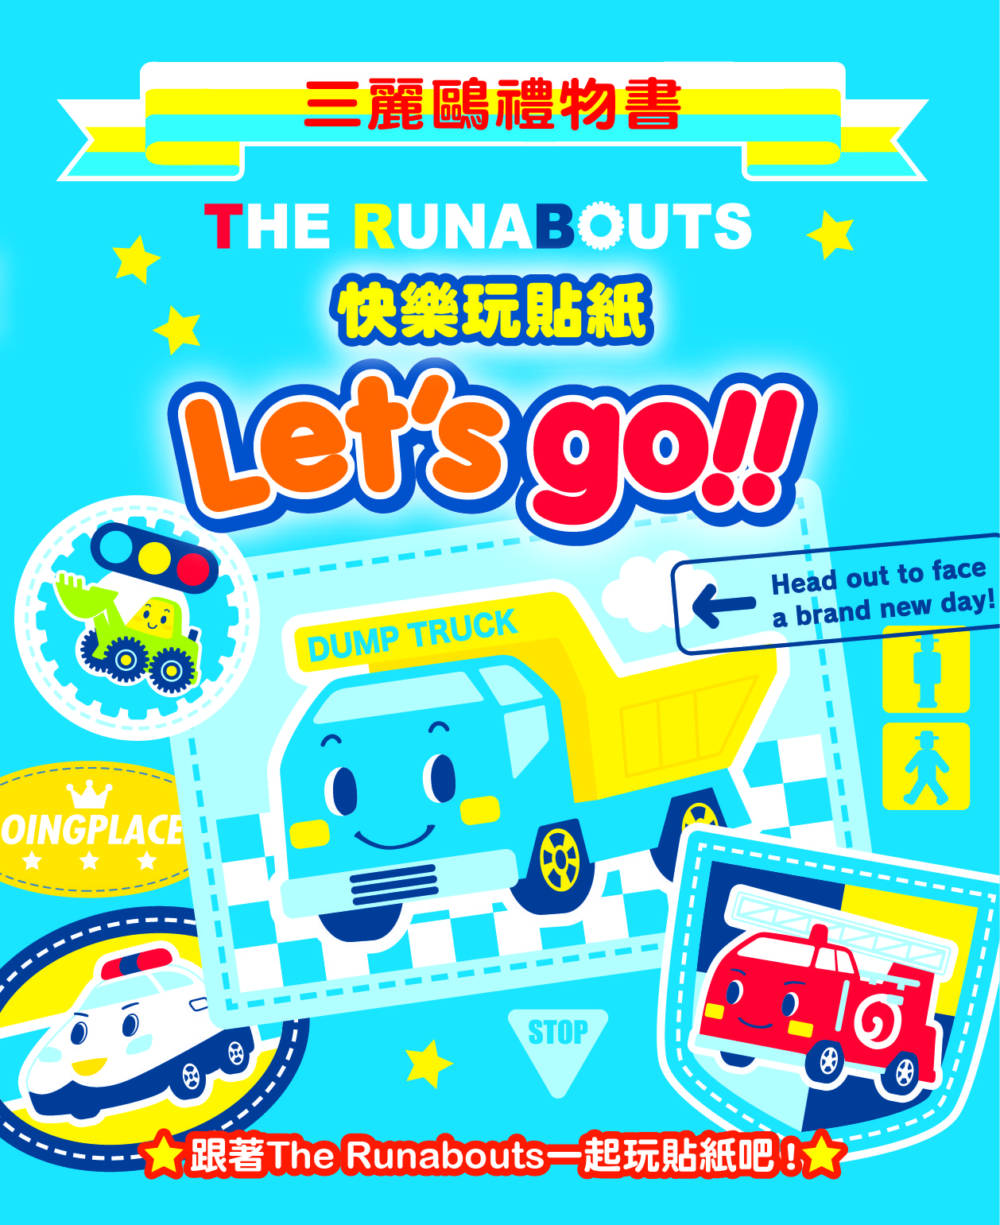 The Runabouts Sticker Activity Book • THE RUNABOUTS 快樂玩貼紙 Let’s go!!